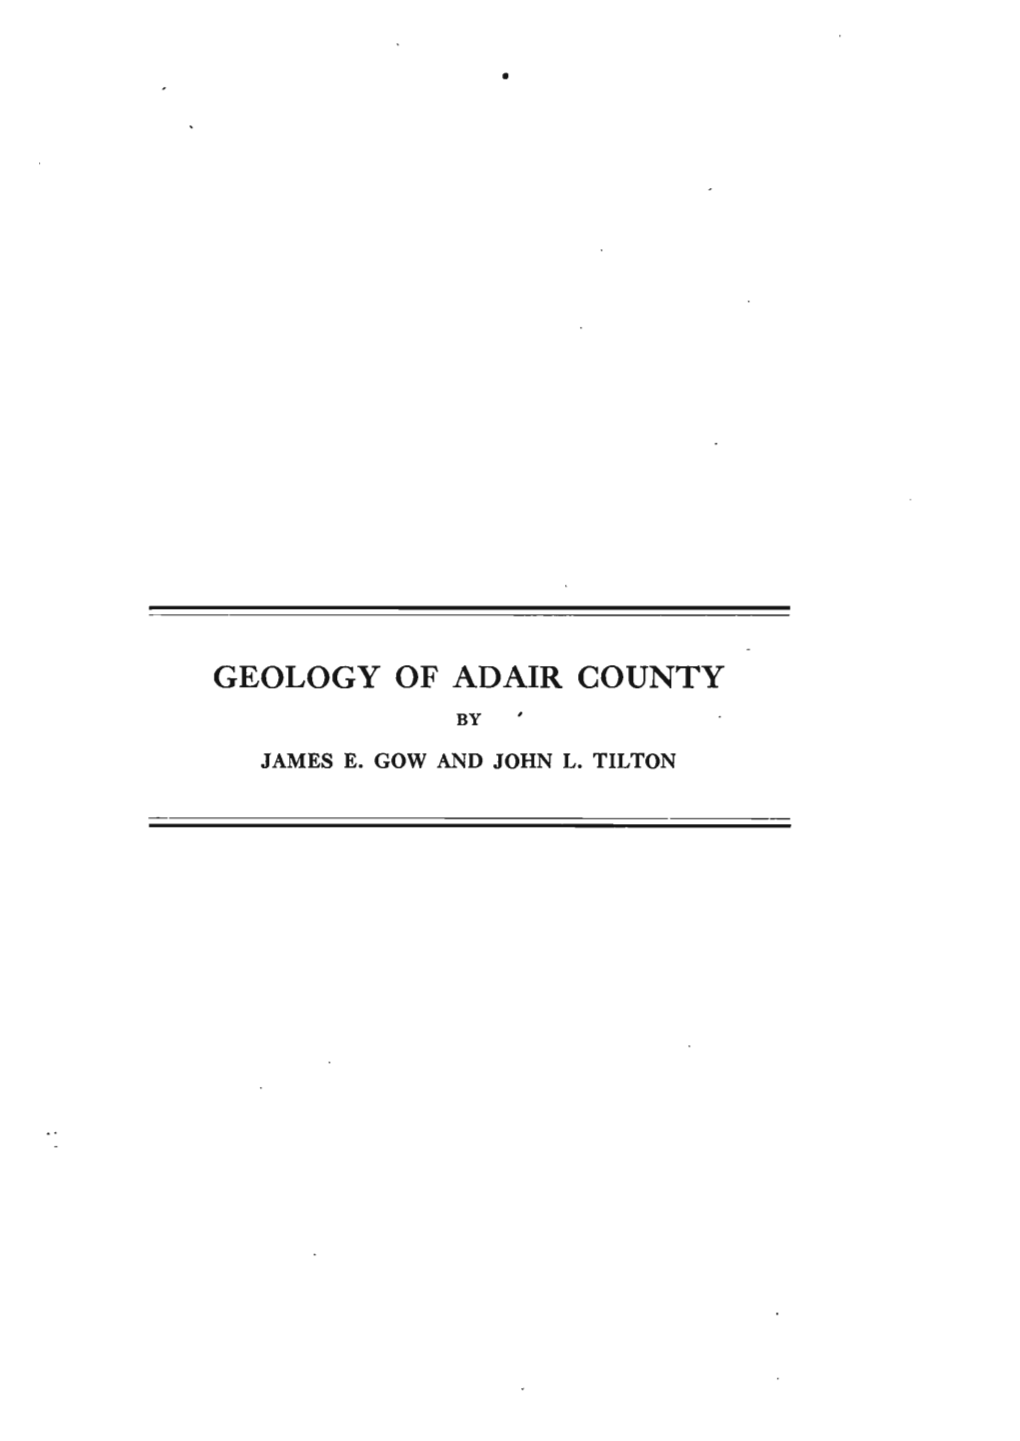 Geology of Adair County By